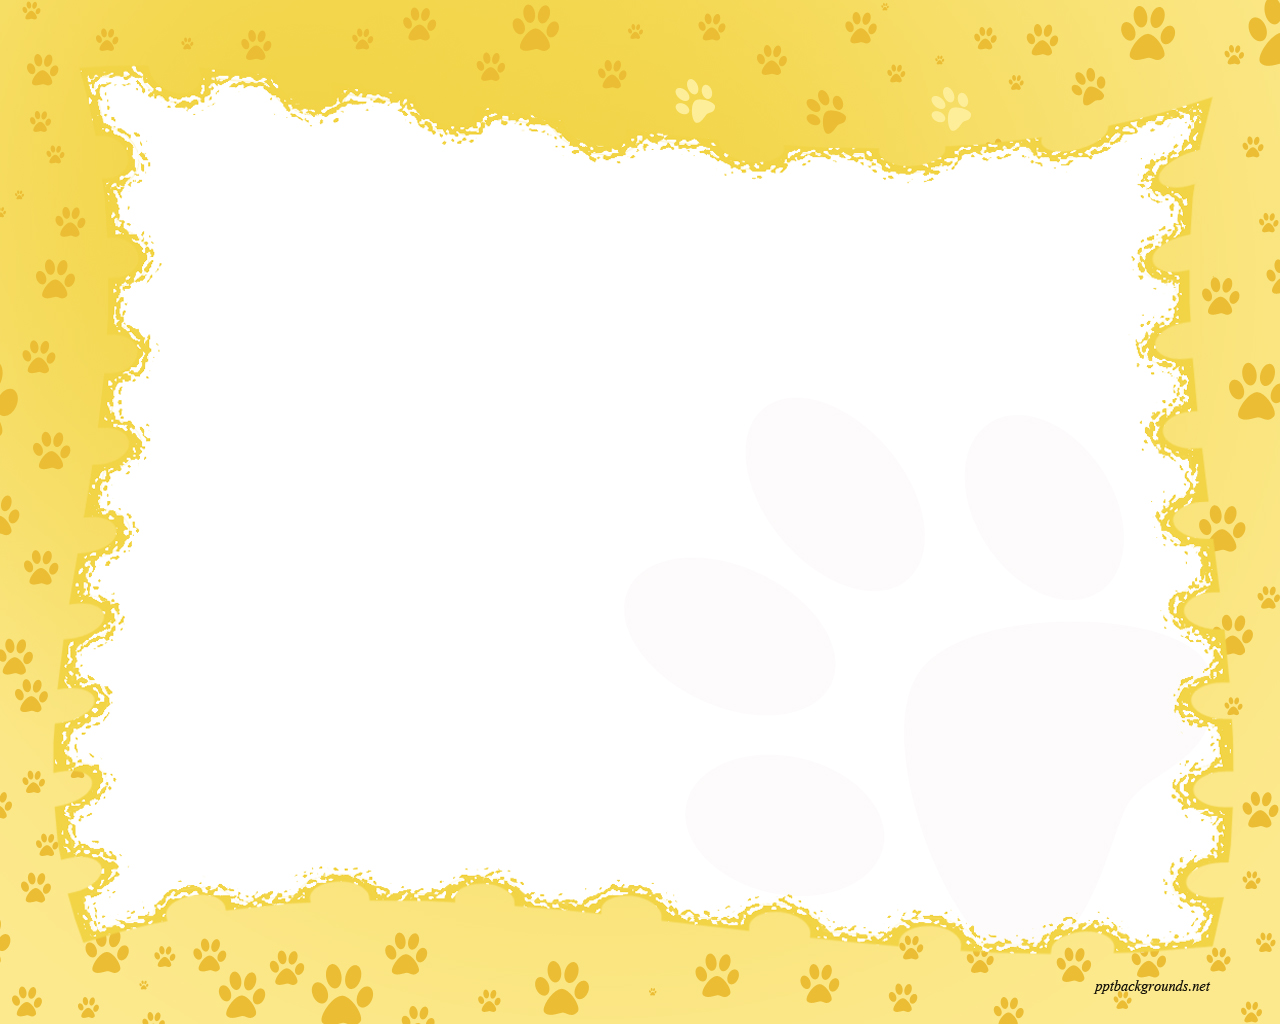 Paw Prints Border powerpoint background